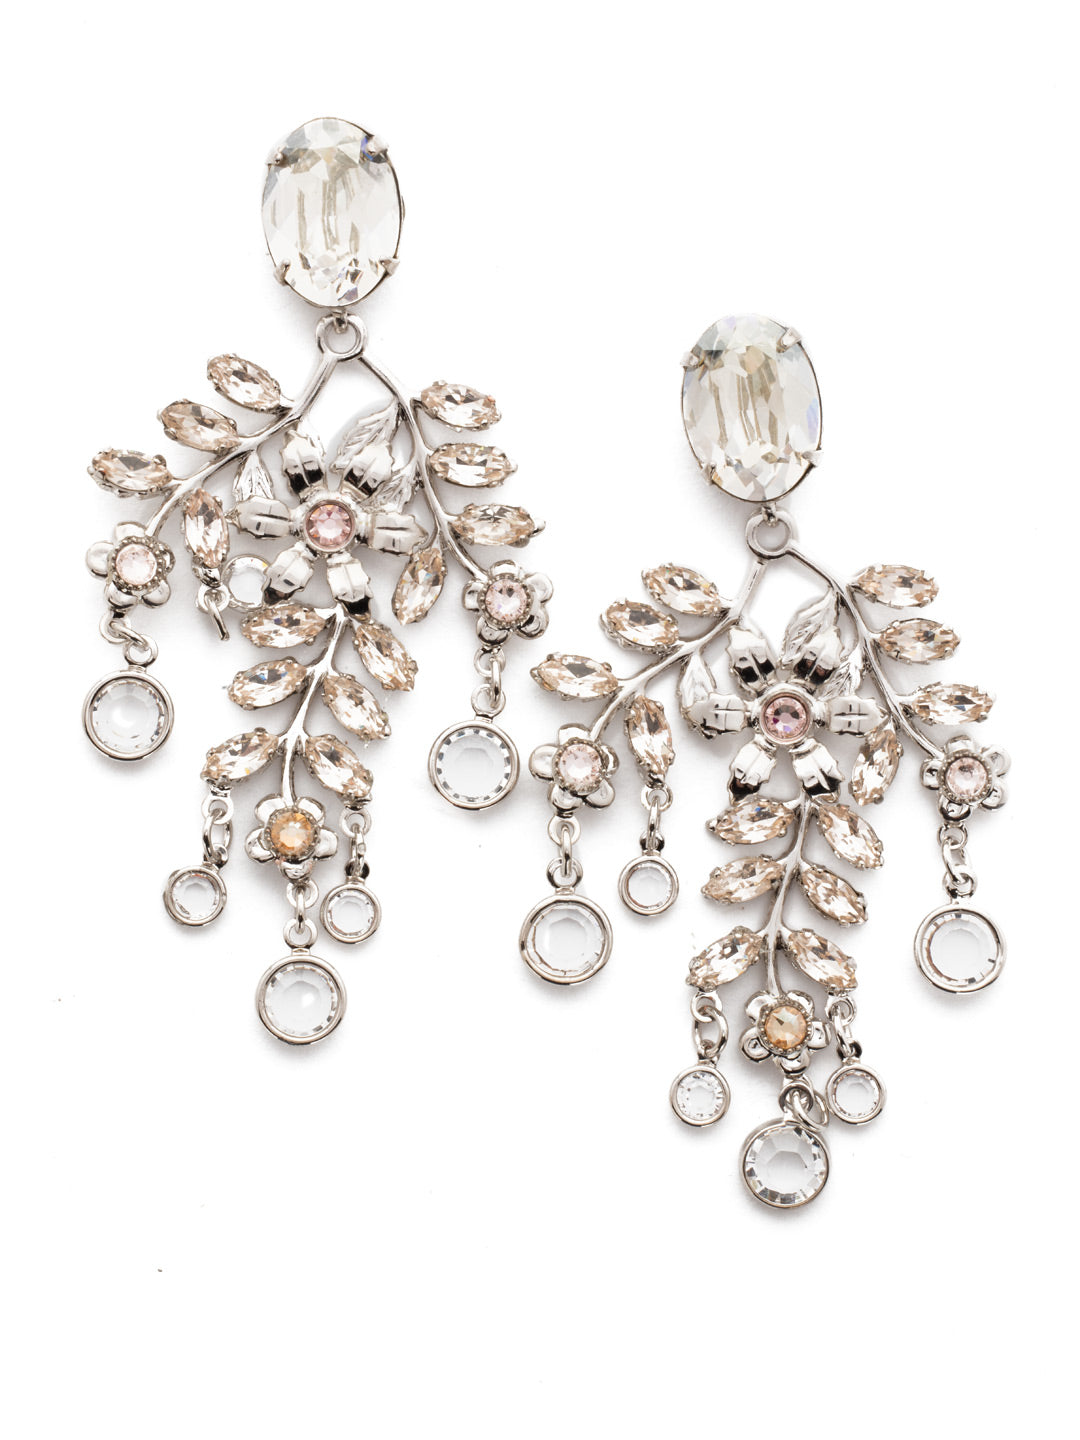 Augusta Post Earrings - EEG18RHSRO - A classic Sorrelli style to make a statement or wear everyday. From Sorrelli's Soft Rose collection in our Palladium Silver-tone finish.